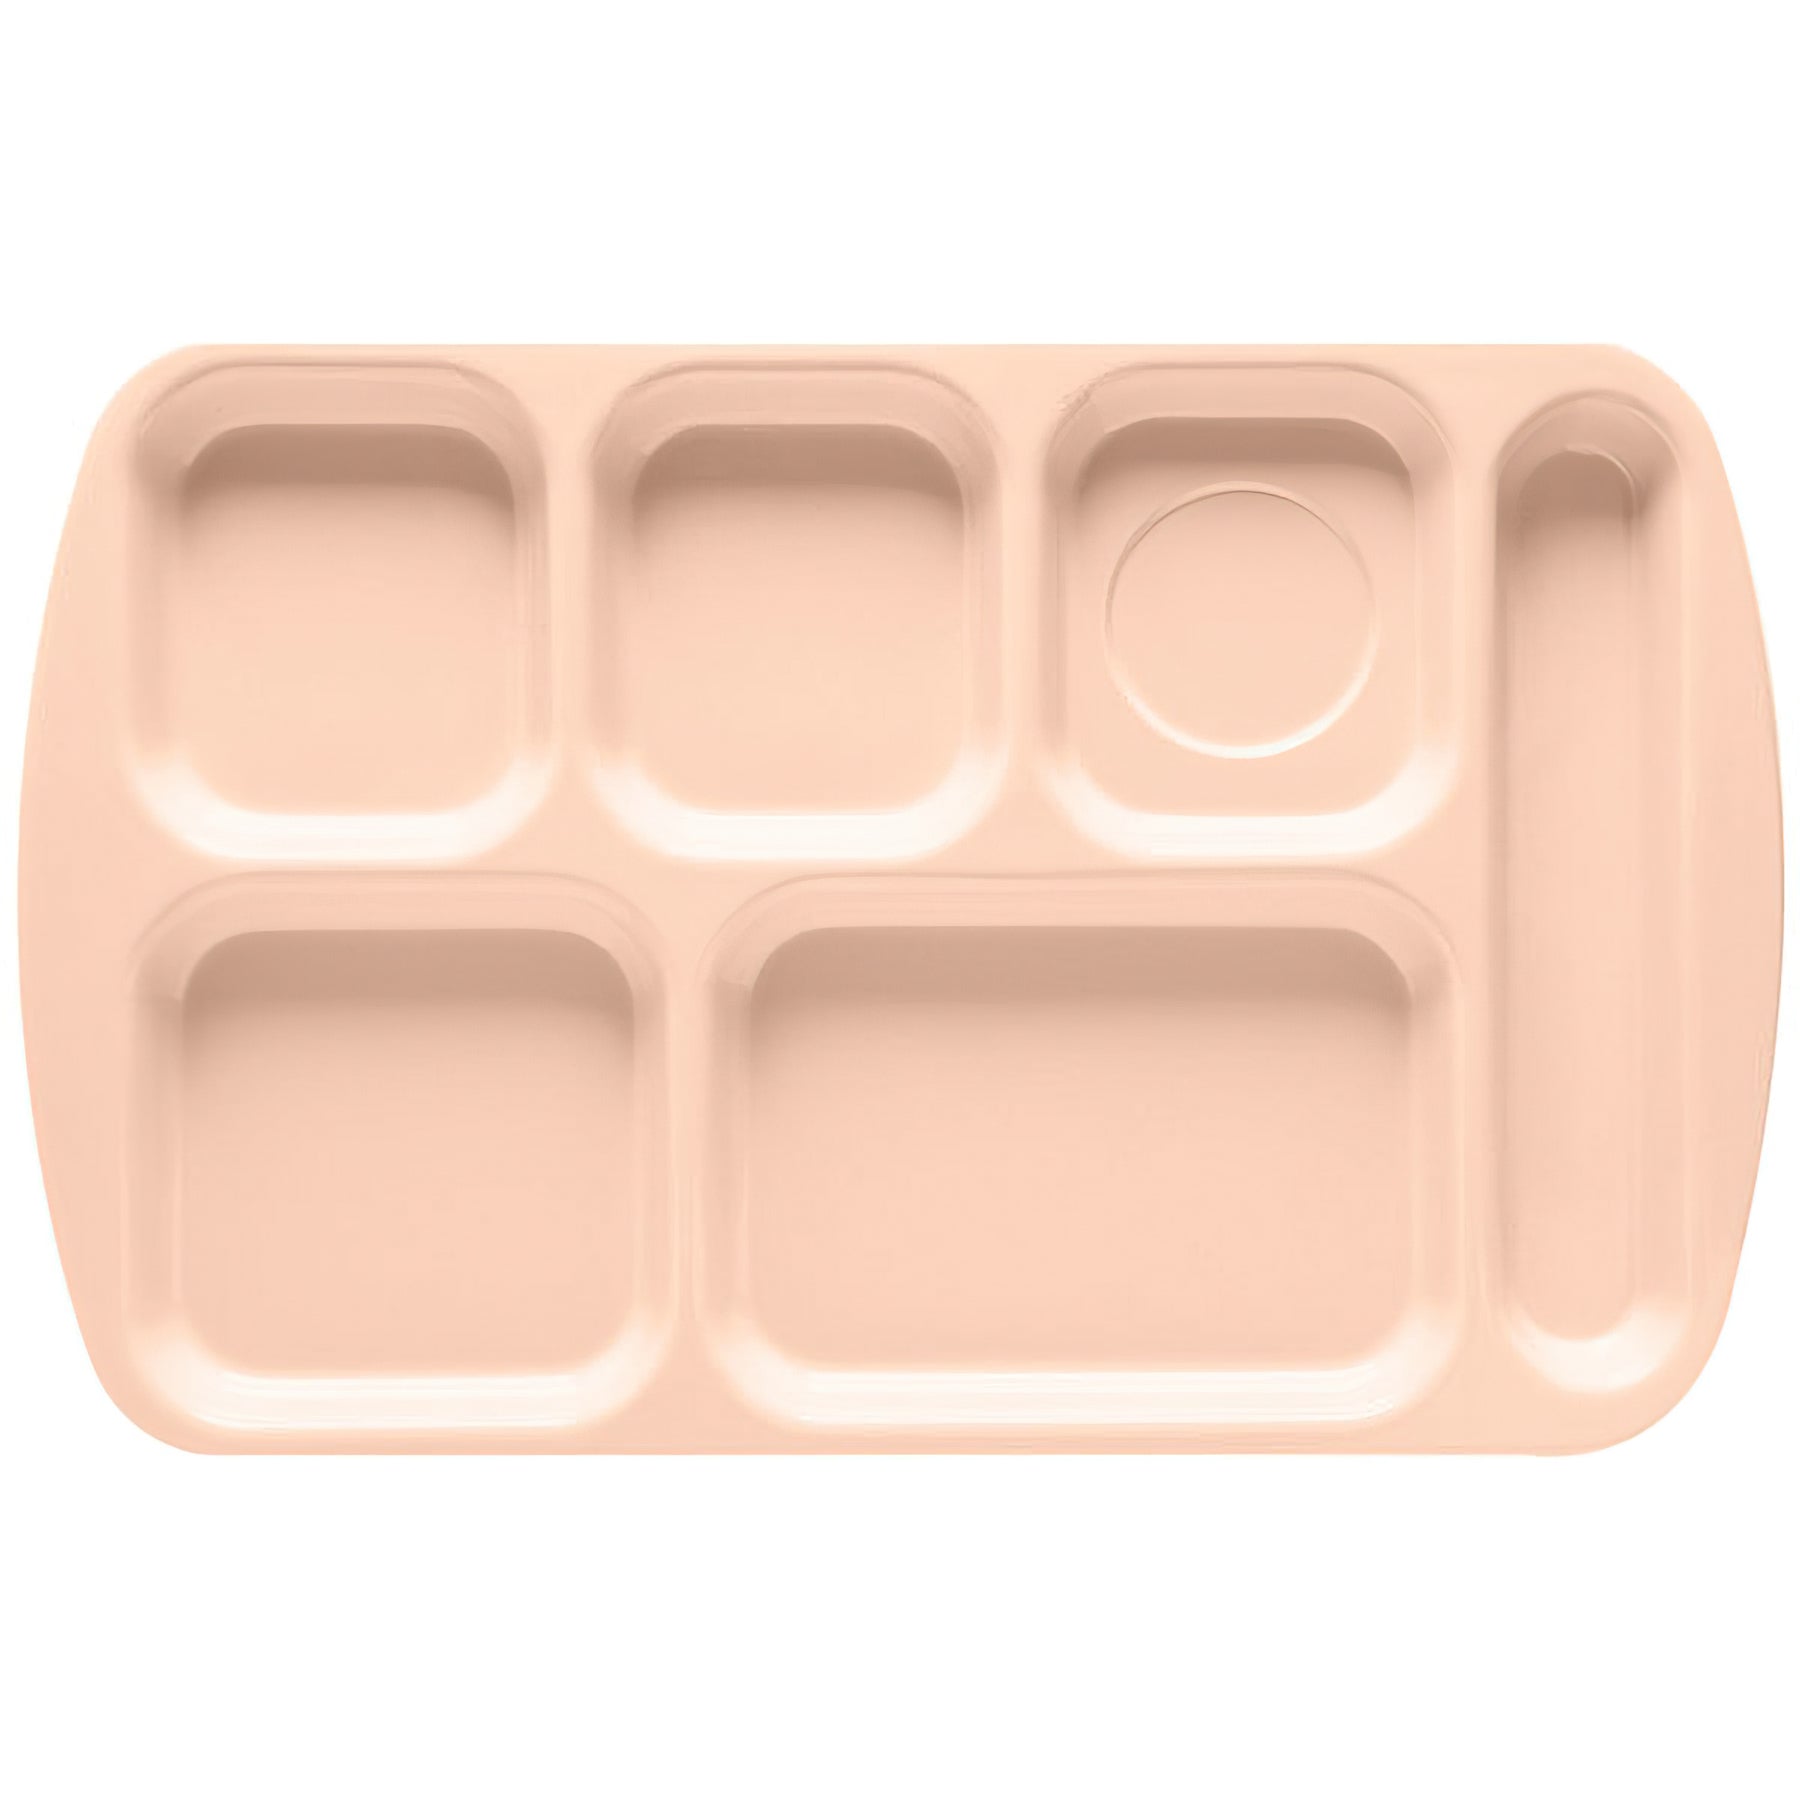 15.5 x 9.875 Right Handed 6-Compartment Tray, 0.875 Tall –